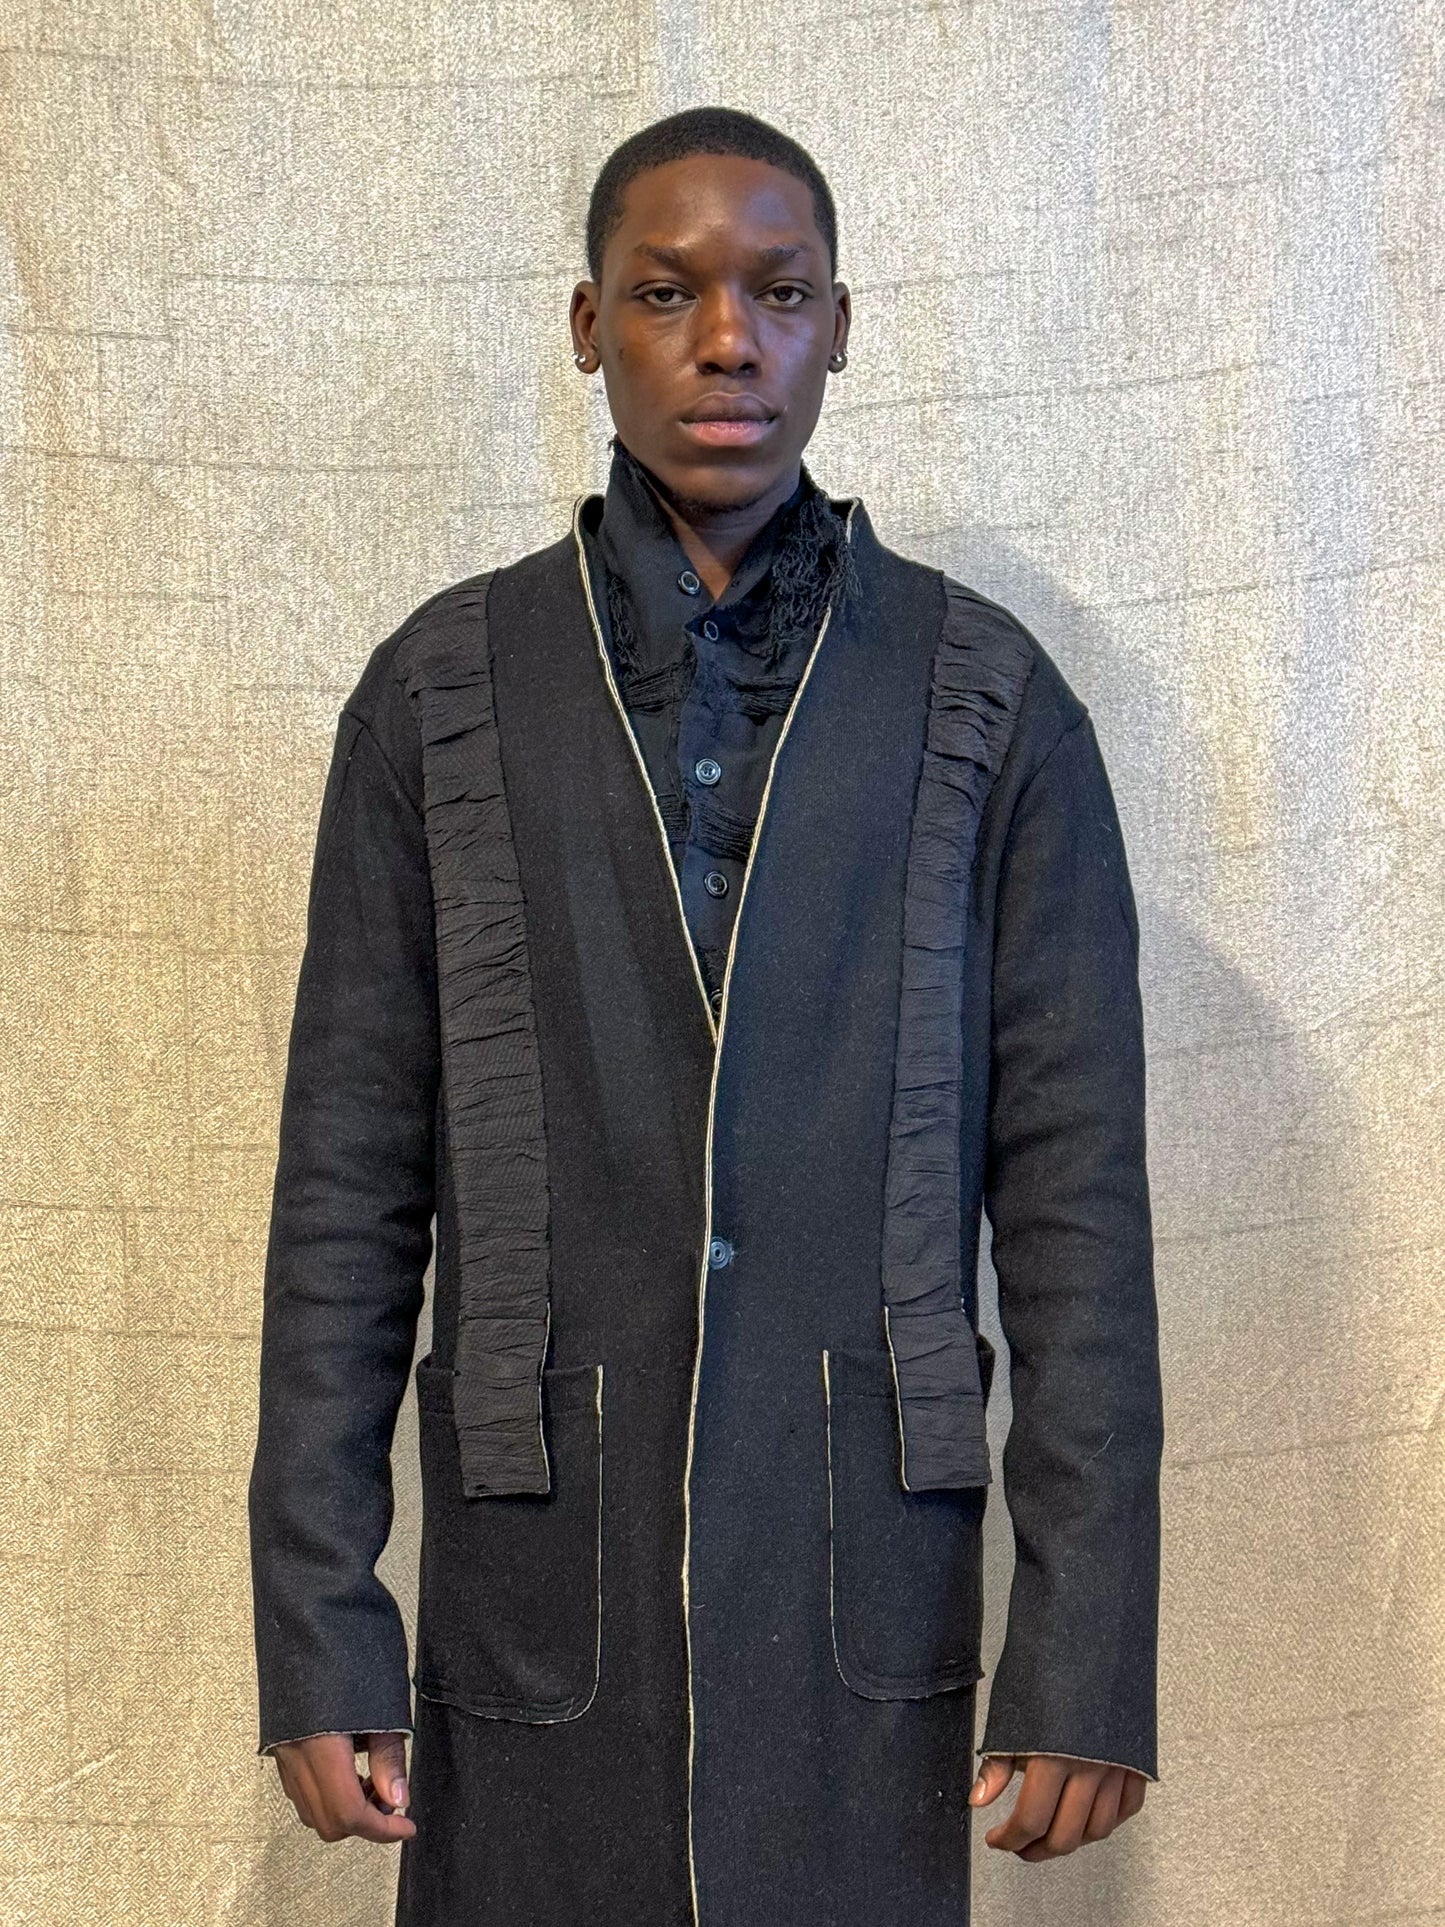 SS24 || RUCHED LAPEL PROTOLOGICAL ARCHETYPE CARDI-COAT || BLACK WOOL